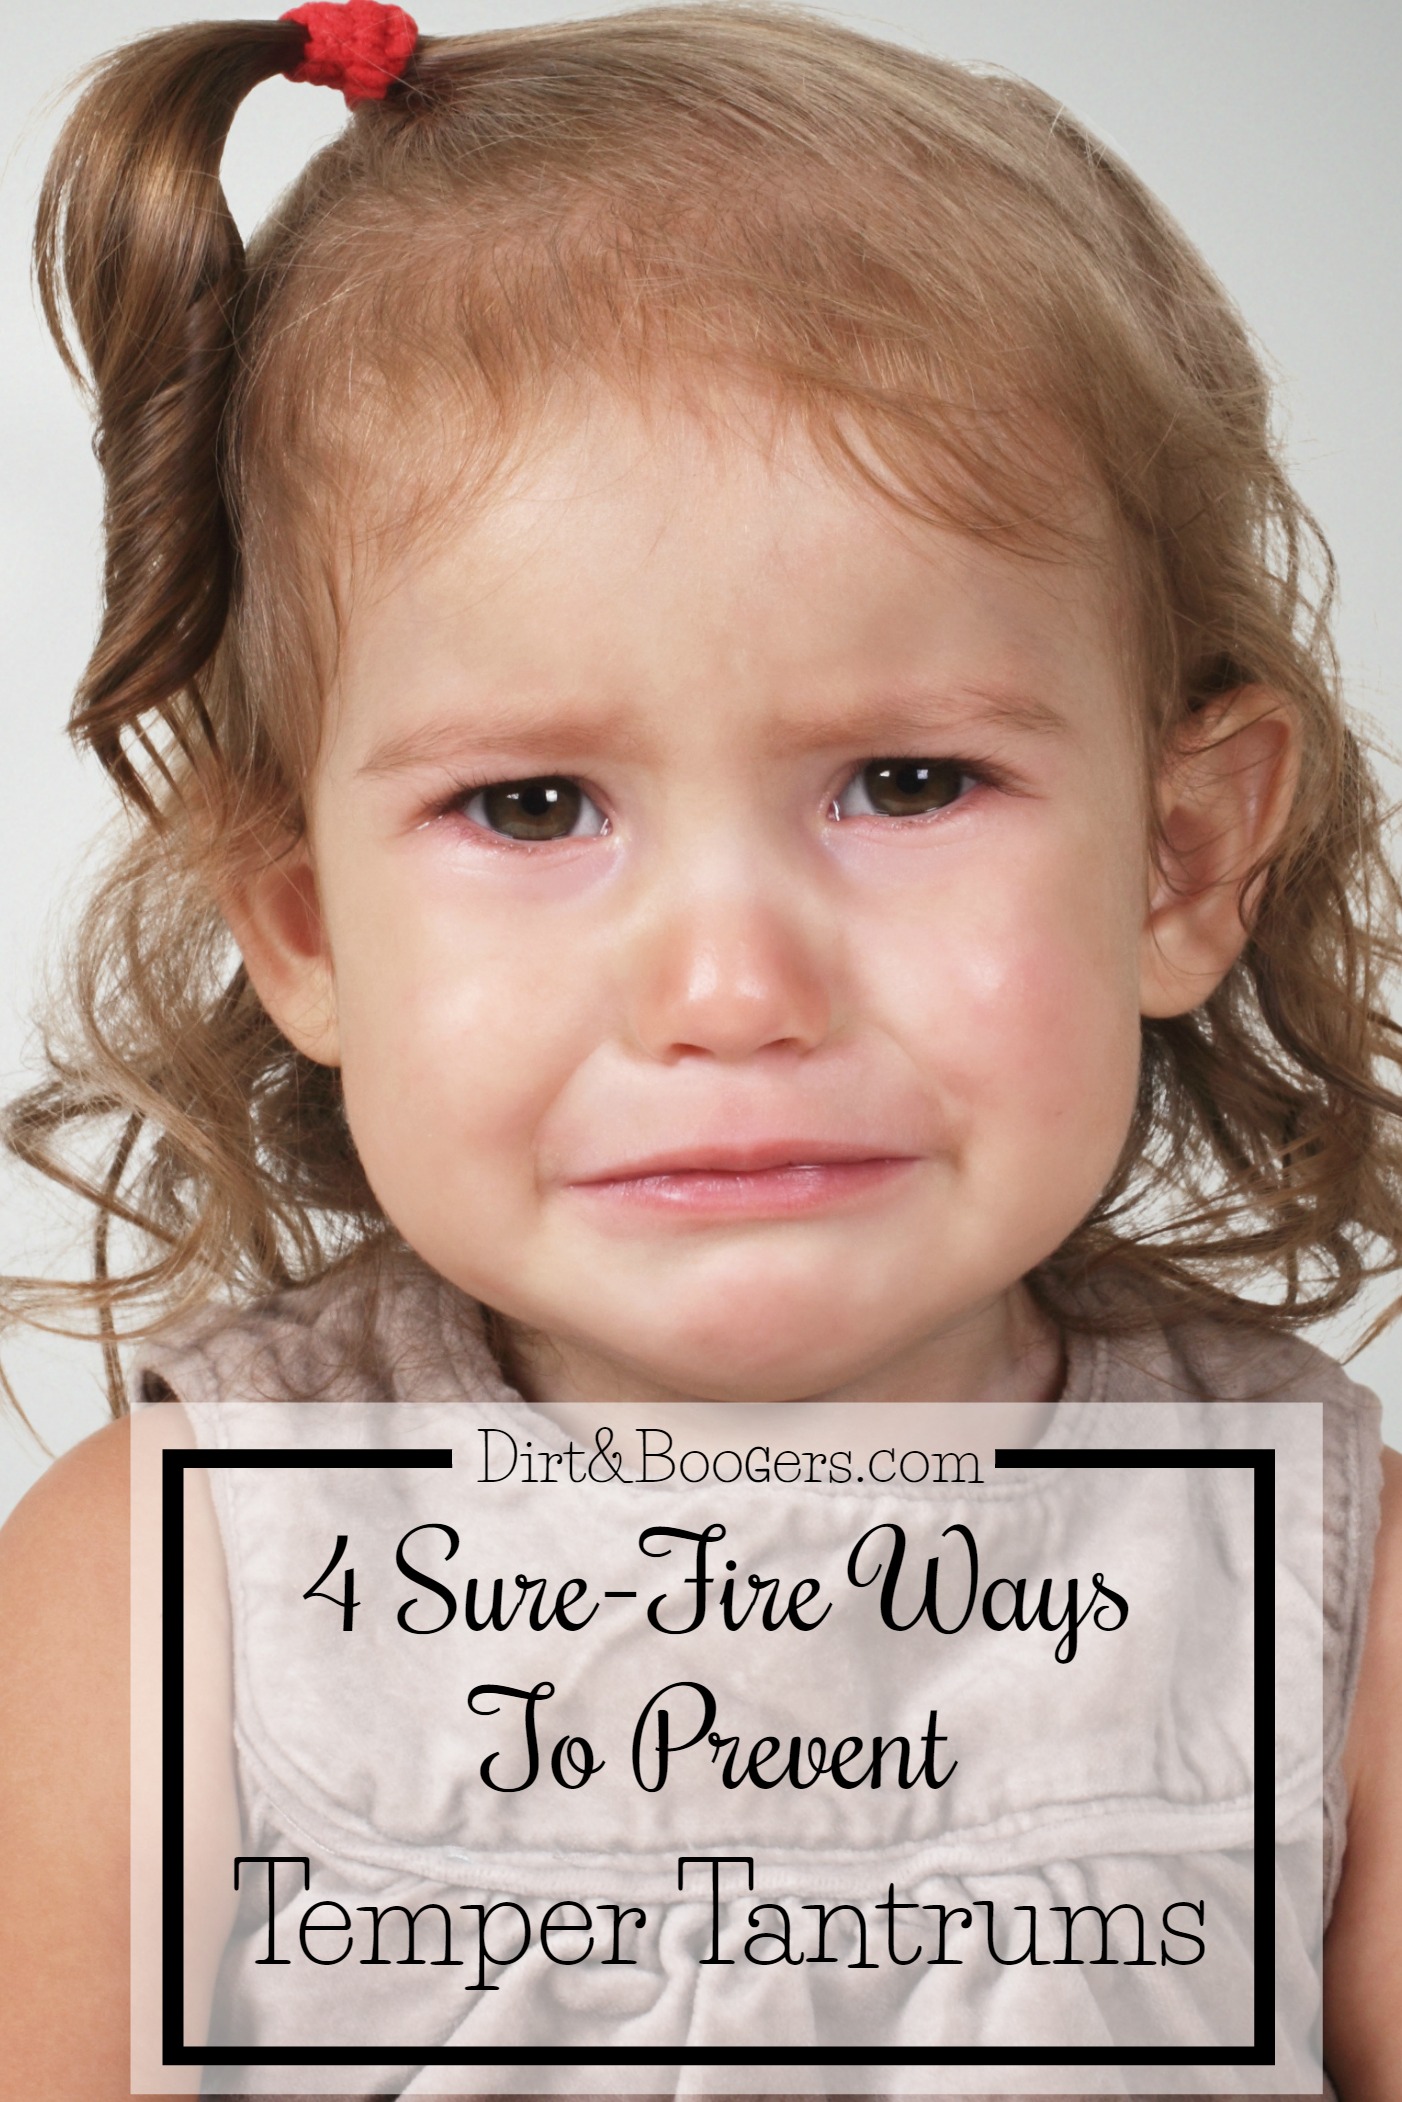 Temper tantrums are so hard! Love these great parenting tips to keep in mind